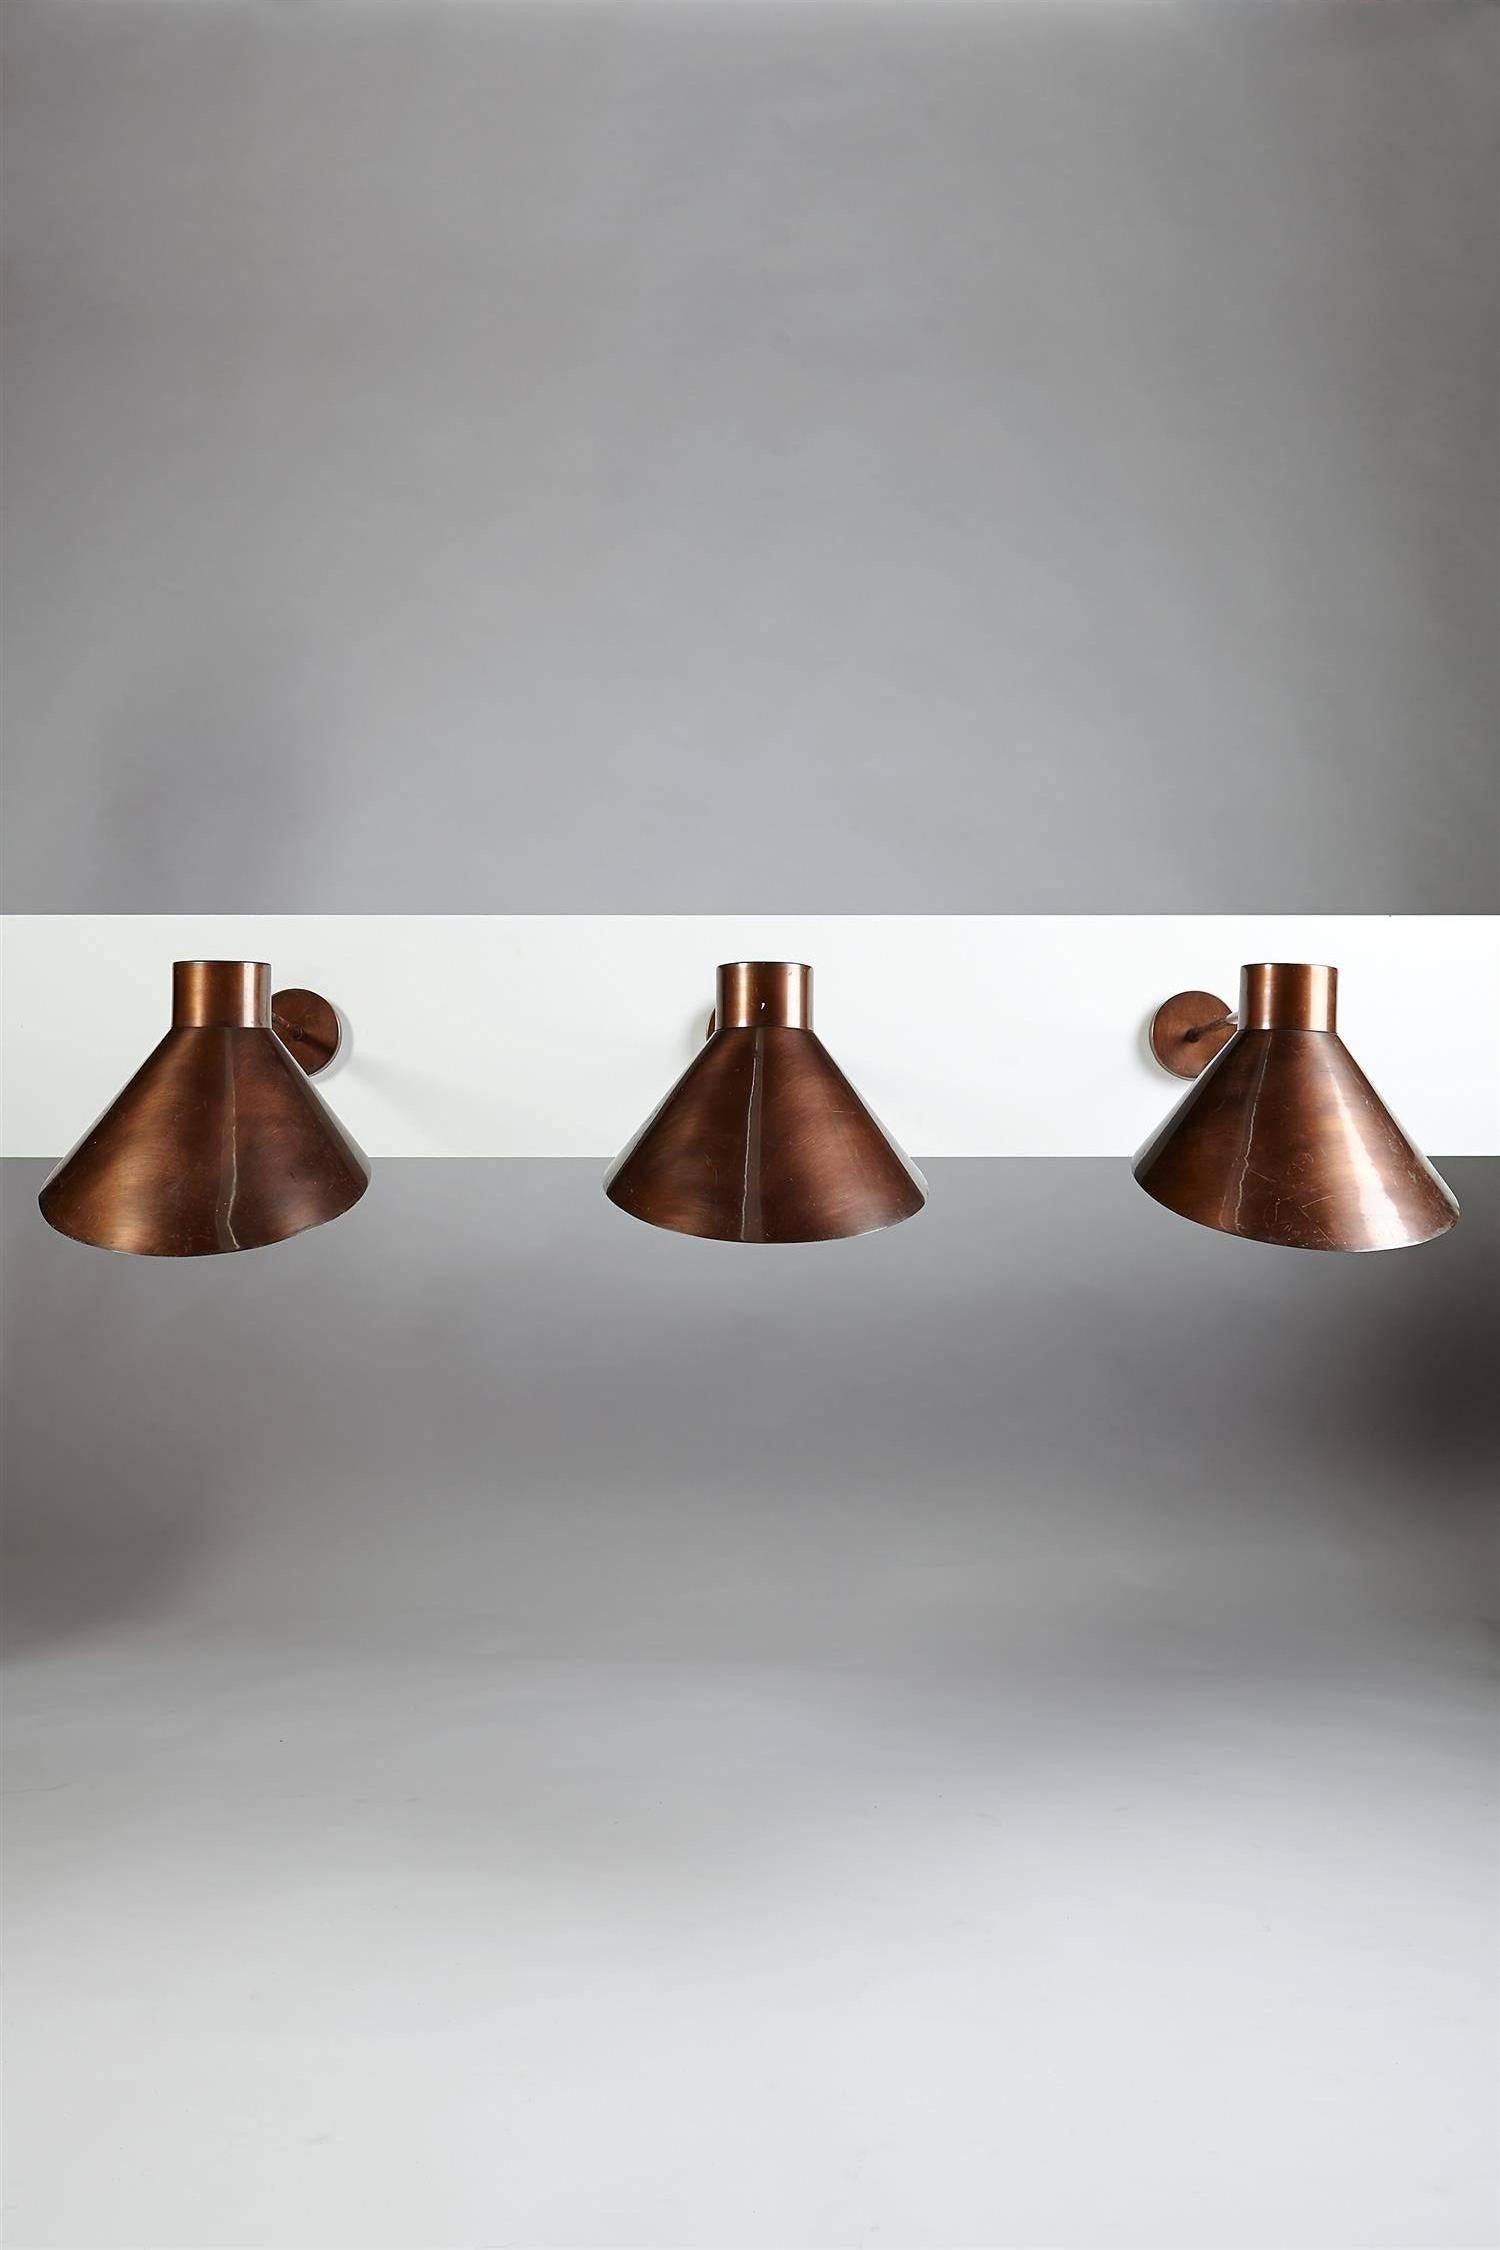 Rare set of three wall lamps in burnished copper.

